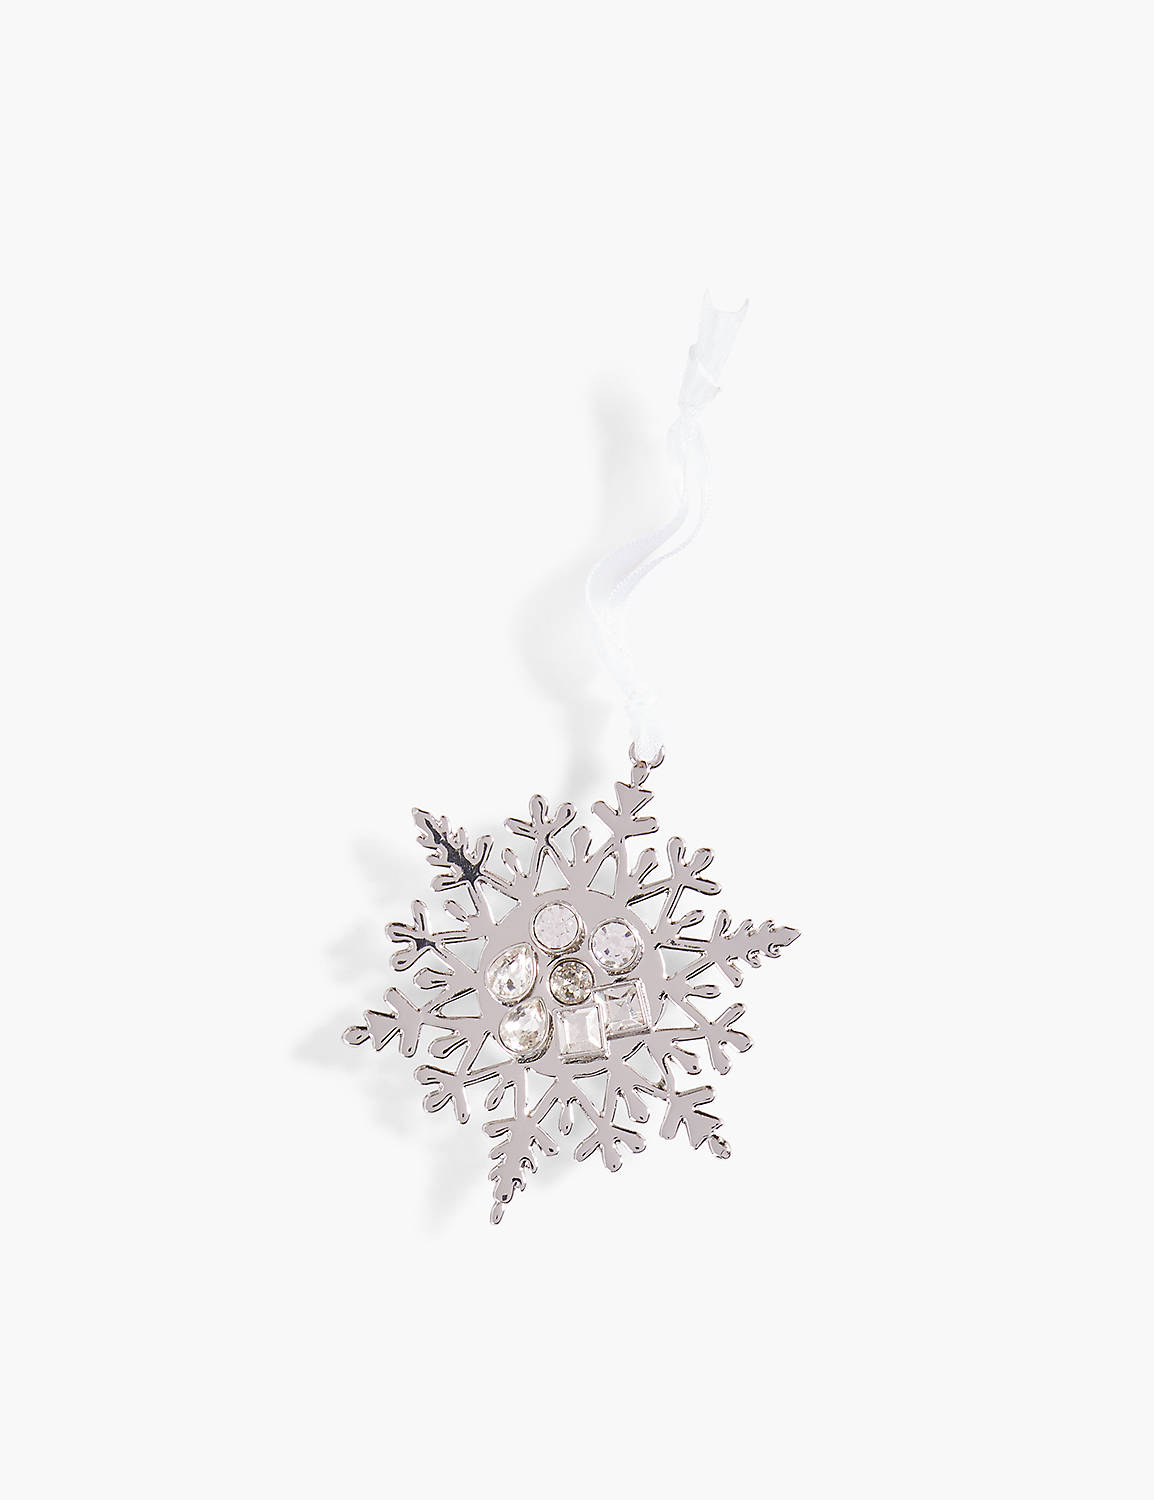 SNOWFLAKE ORNAMENT WITH 3 PK EARRIN Product Image 1